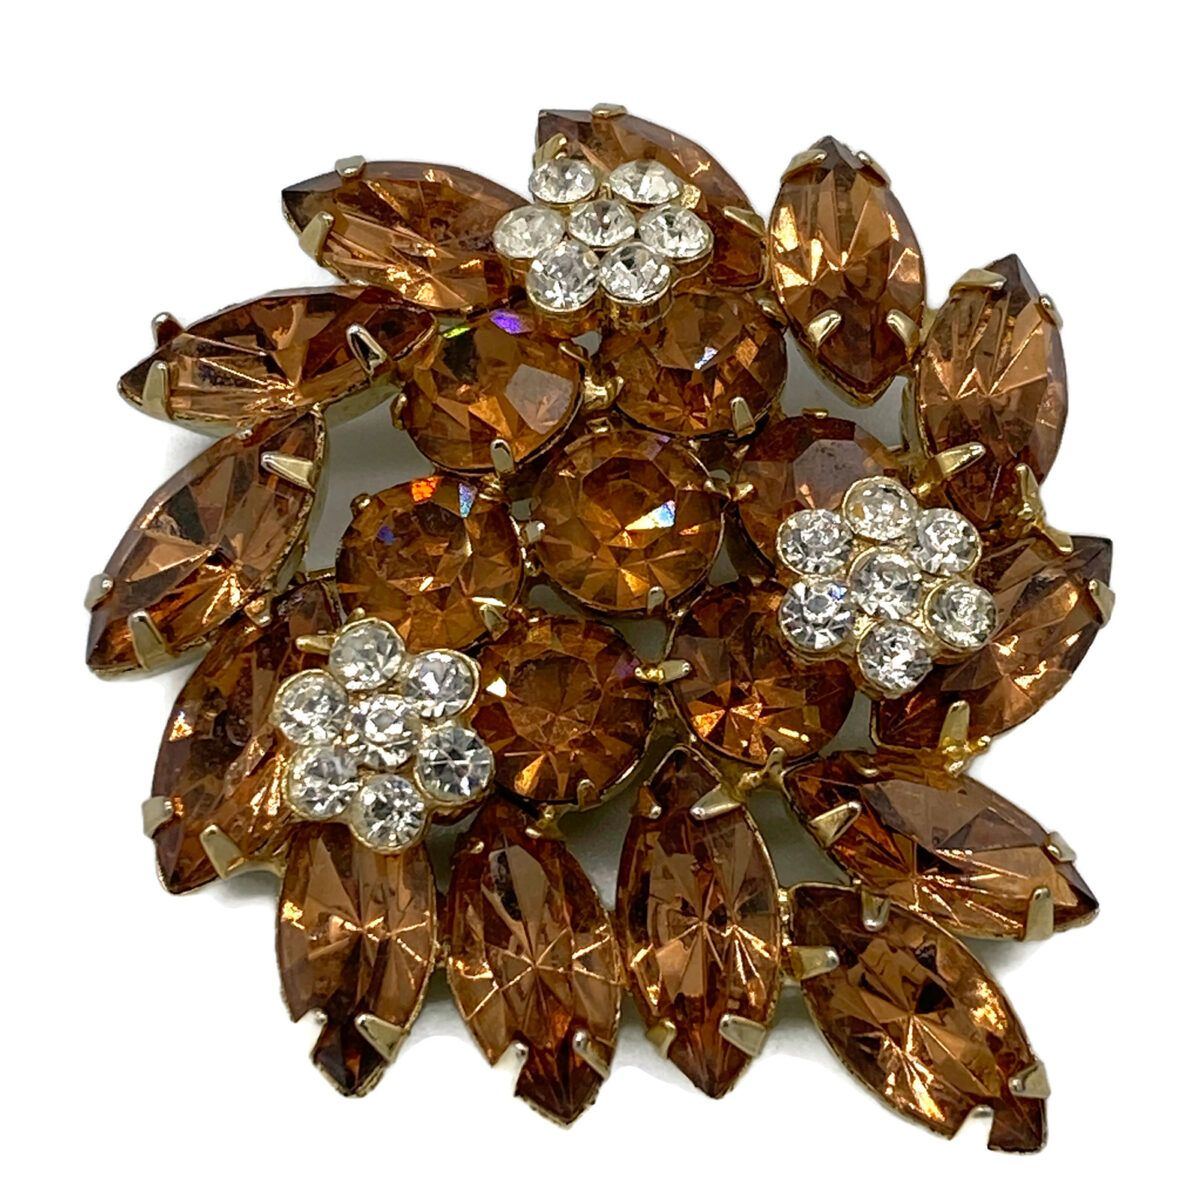 Vintage Weiss Brooch with Navettes and Chaton-Cut Florets